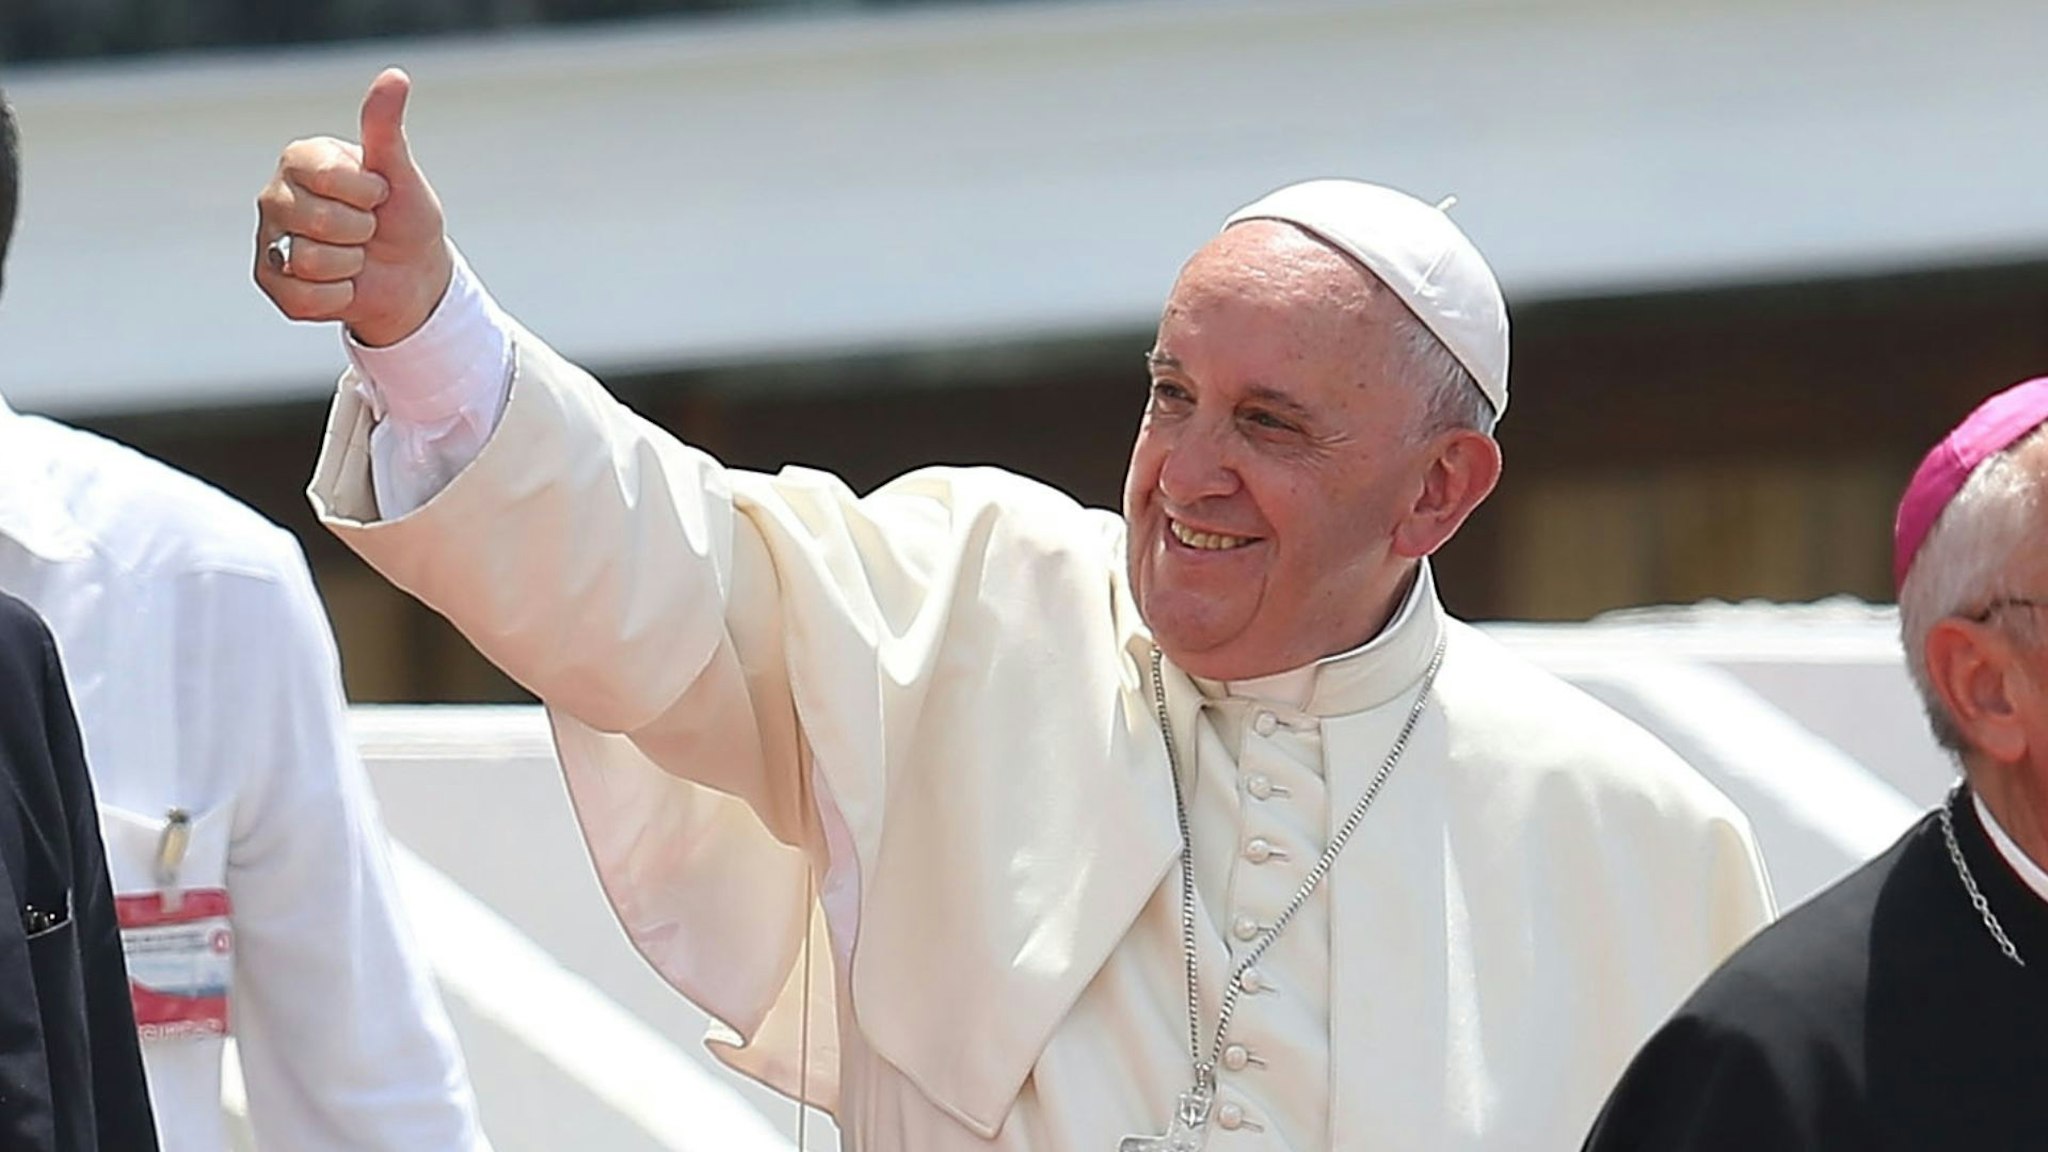 Pope Francis (C) gives the thumbs up at faithful at the end of an open mass celebrated at Calixto Garcia Square in Holguin, eastern Cuba, on September 21, 2015. Holguin, a cradle of Catholic faith on the island and also the home region of communist leaders Fidel and Raul Castro, is the only stop on the pope's eight-day, six-city tour of Cuba and the United States that has never received a papal visit.